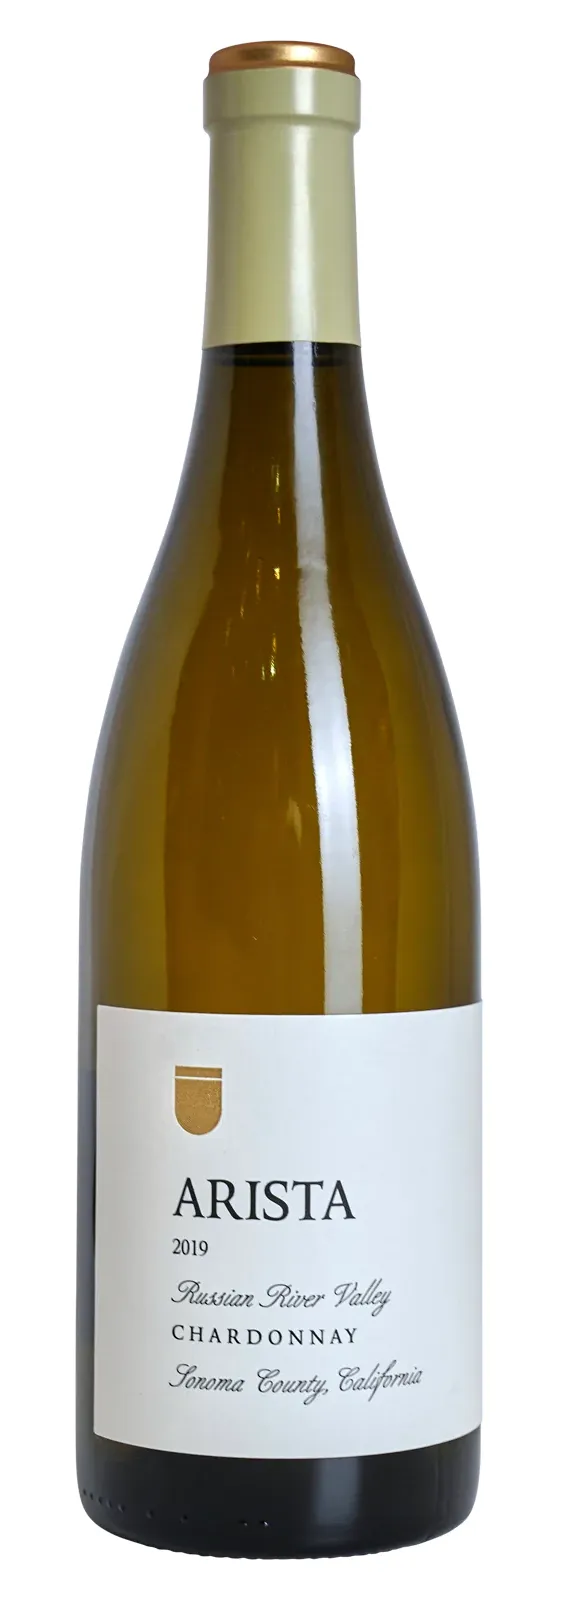 Bottle of Arista Chardonnay from search results